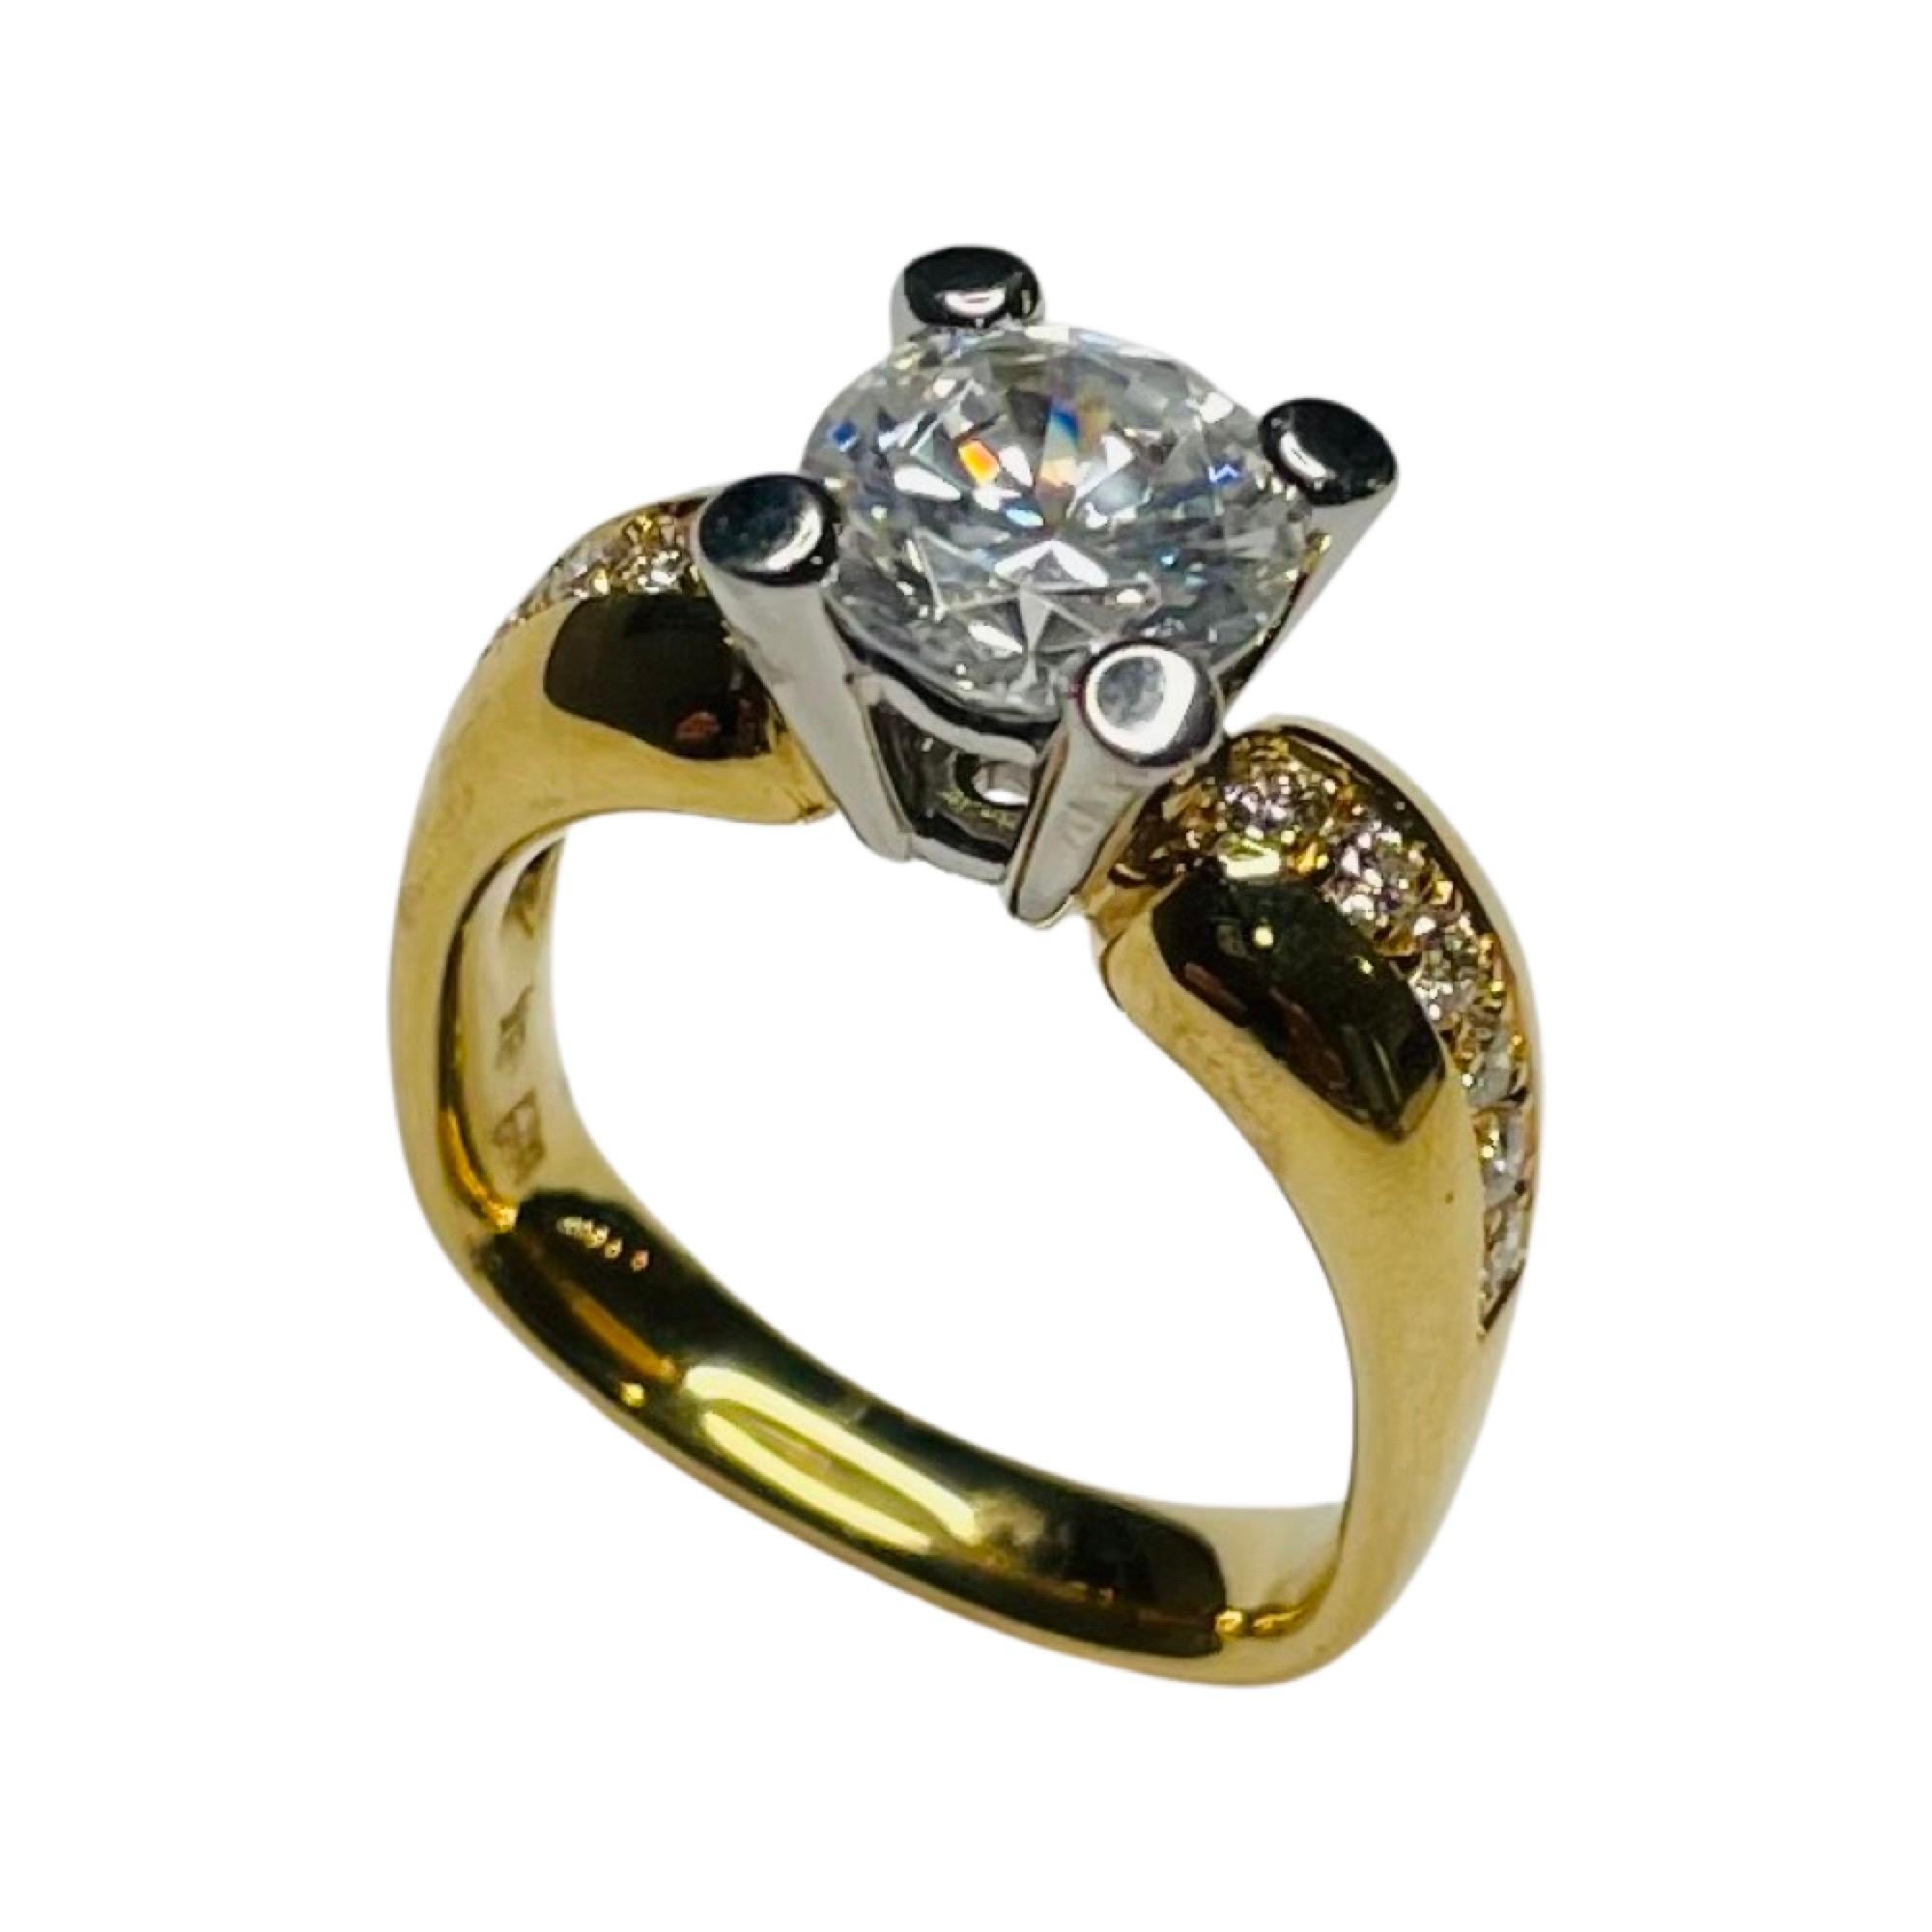 JFA 18K Yellow Gold & Platinum Diamond Engagement Ring. The center stone is a 8.0 mm Cubic Zirconia set in a platinum four prong head. It is equivalent in size to a 2.0 carat diamond. It can be replaced with a colored stone, moissonite or natural or